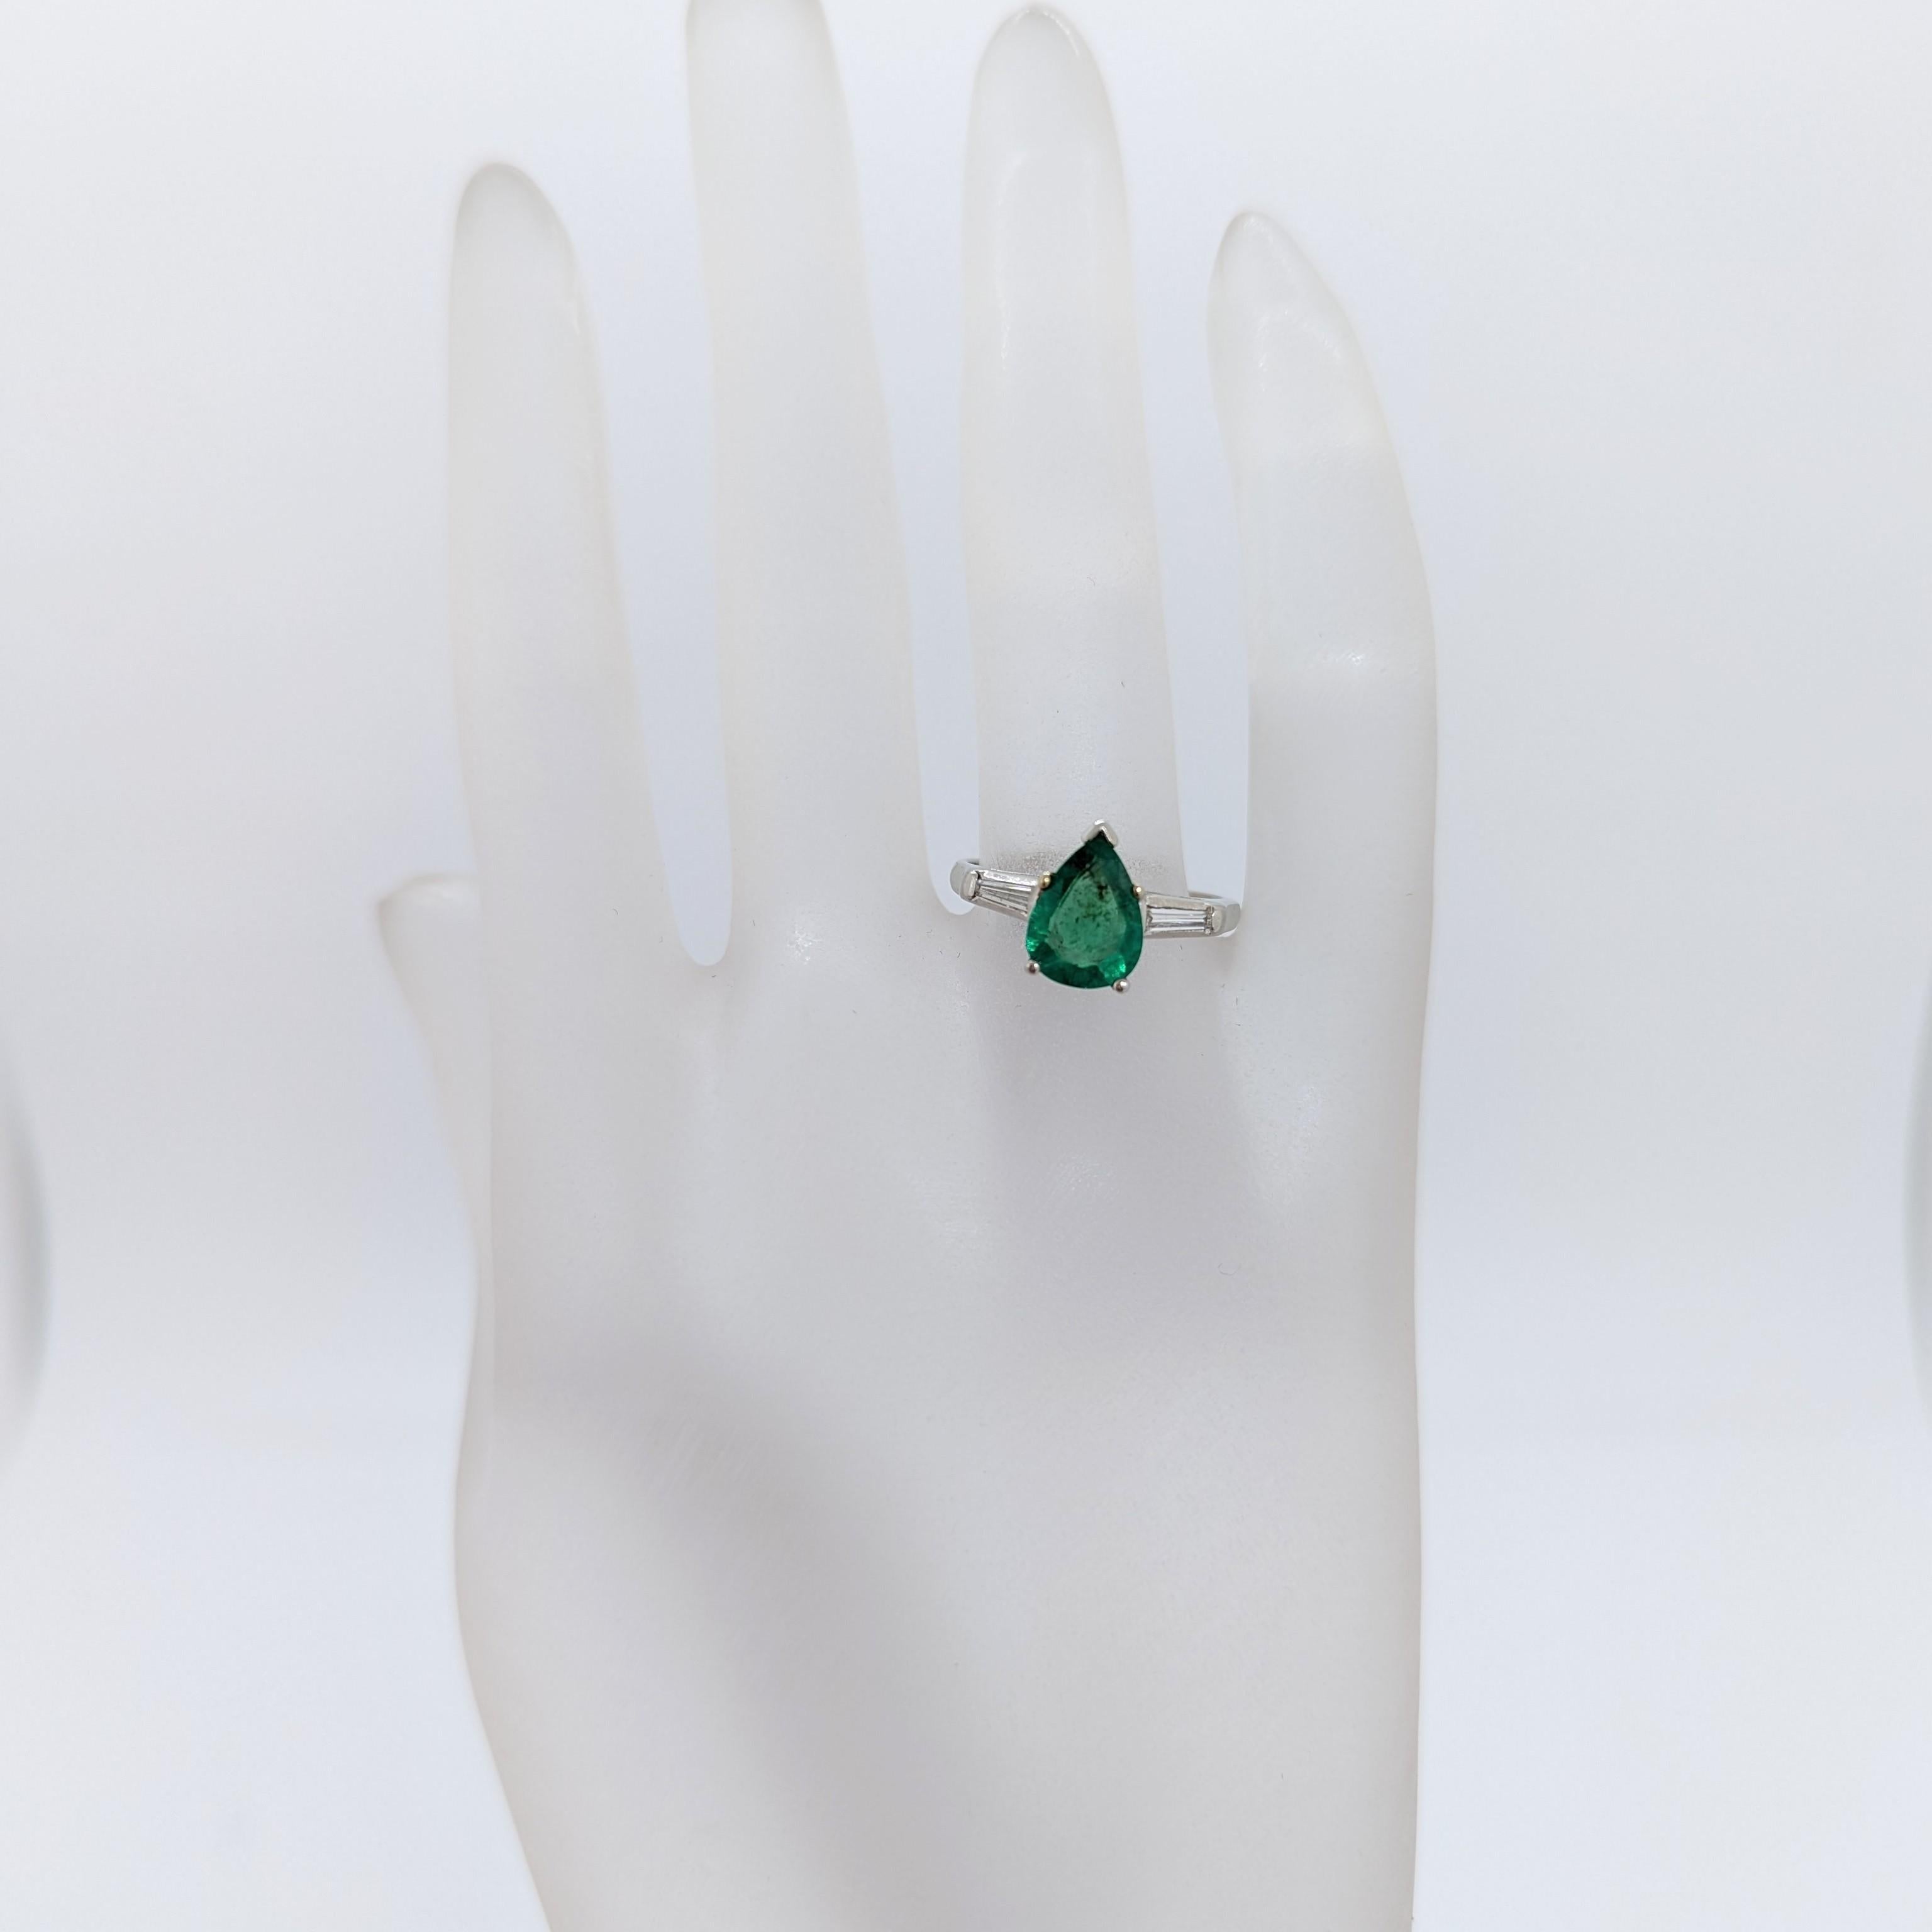 Beautiful 1.29 ct. emerald pear shape with 0.10 ct. white diamond baguettes.  Handmade in platinum.  Ring size 6.5.